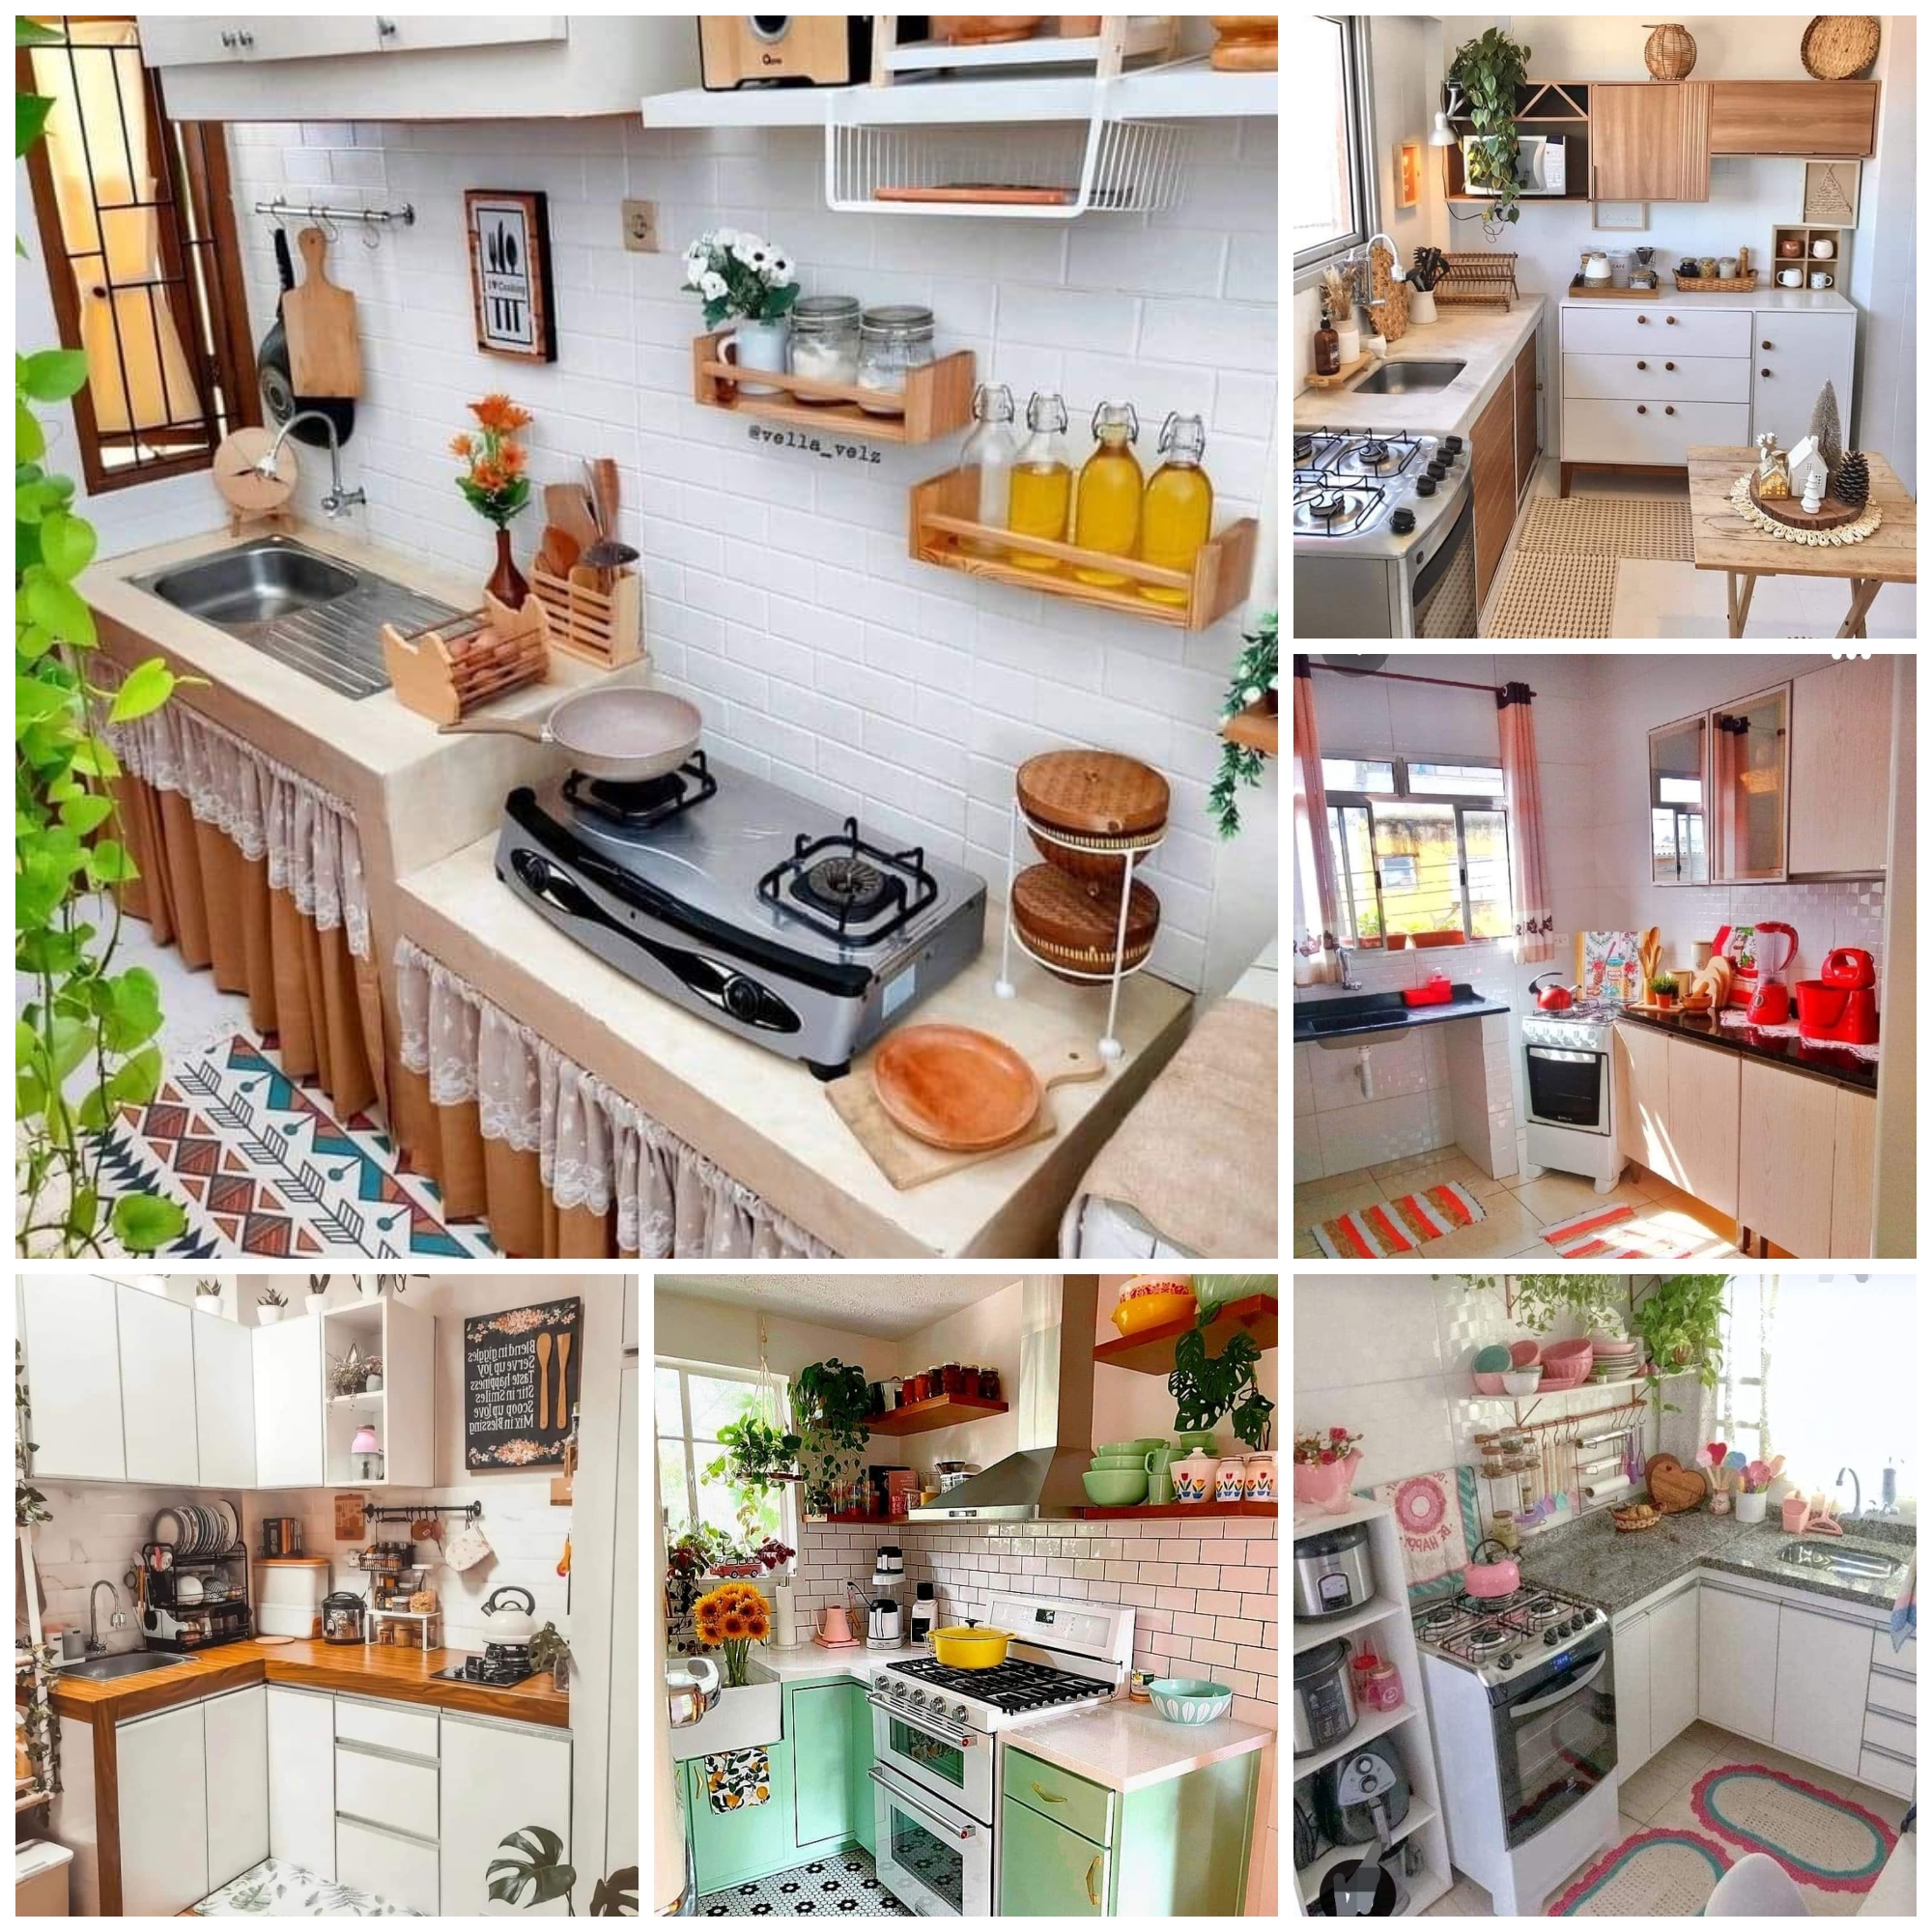 Tiny House Kitchen Ideas To Help You Make the Most of Your Small Space